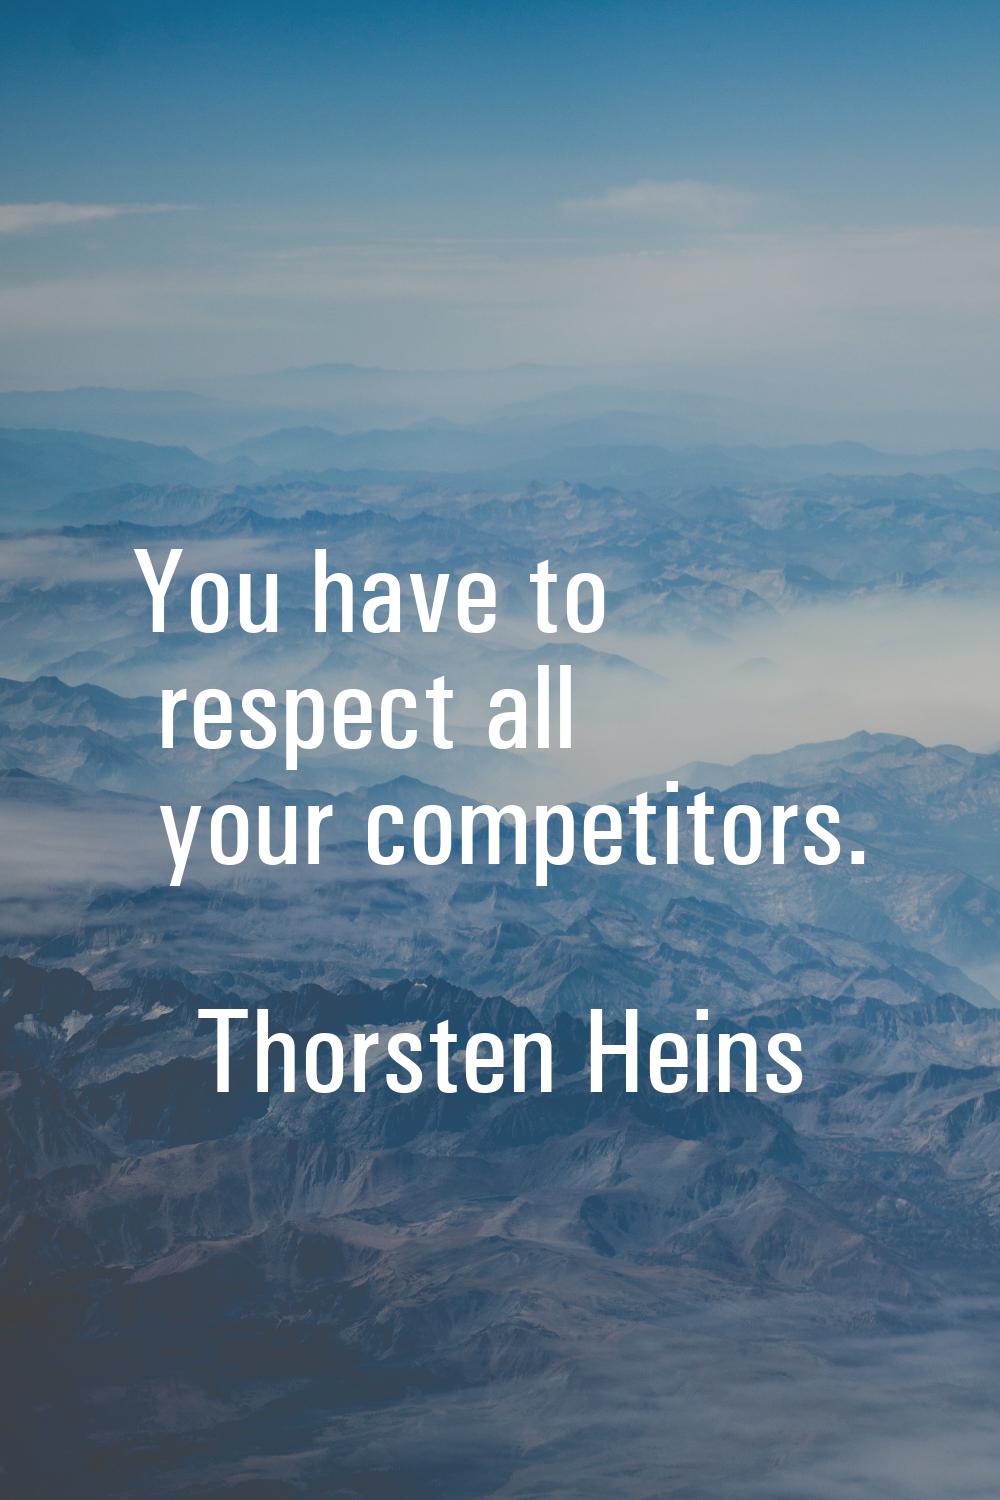 You have to respect all your competitors.